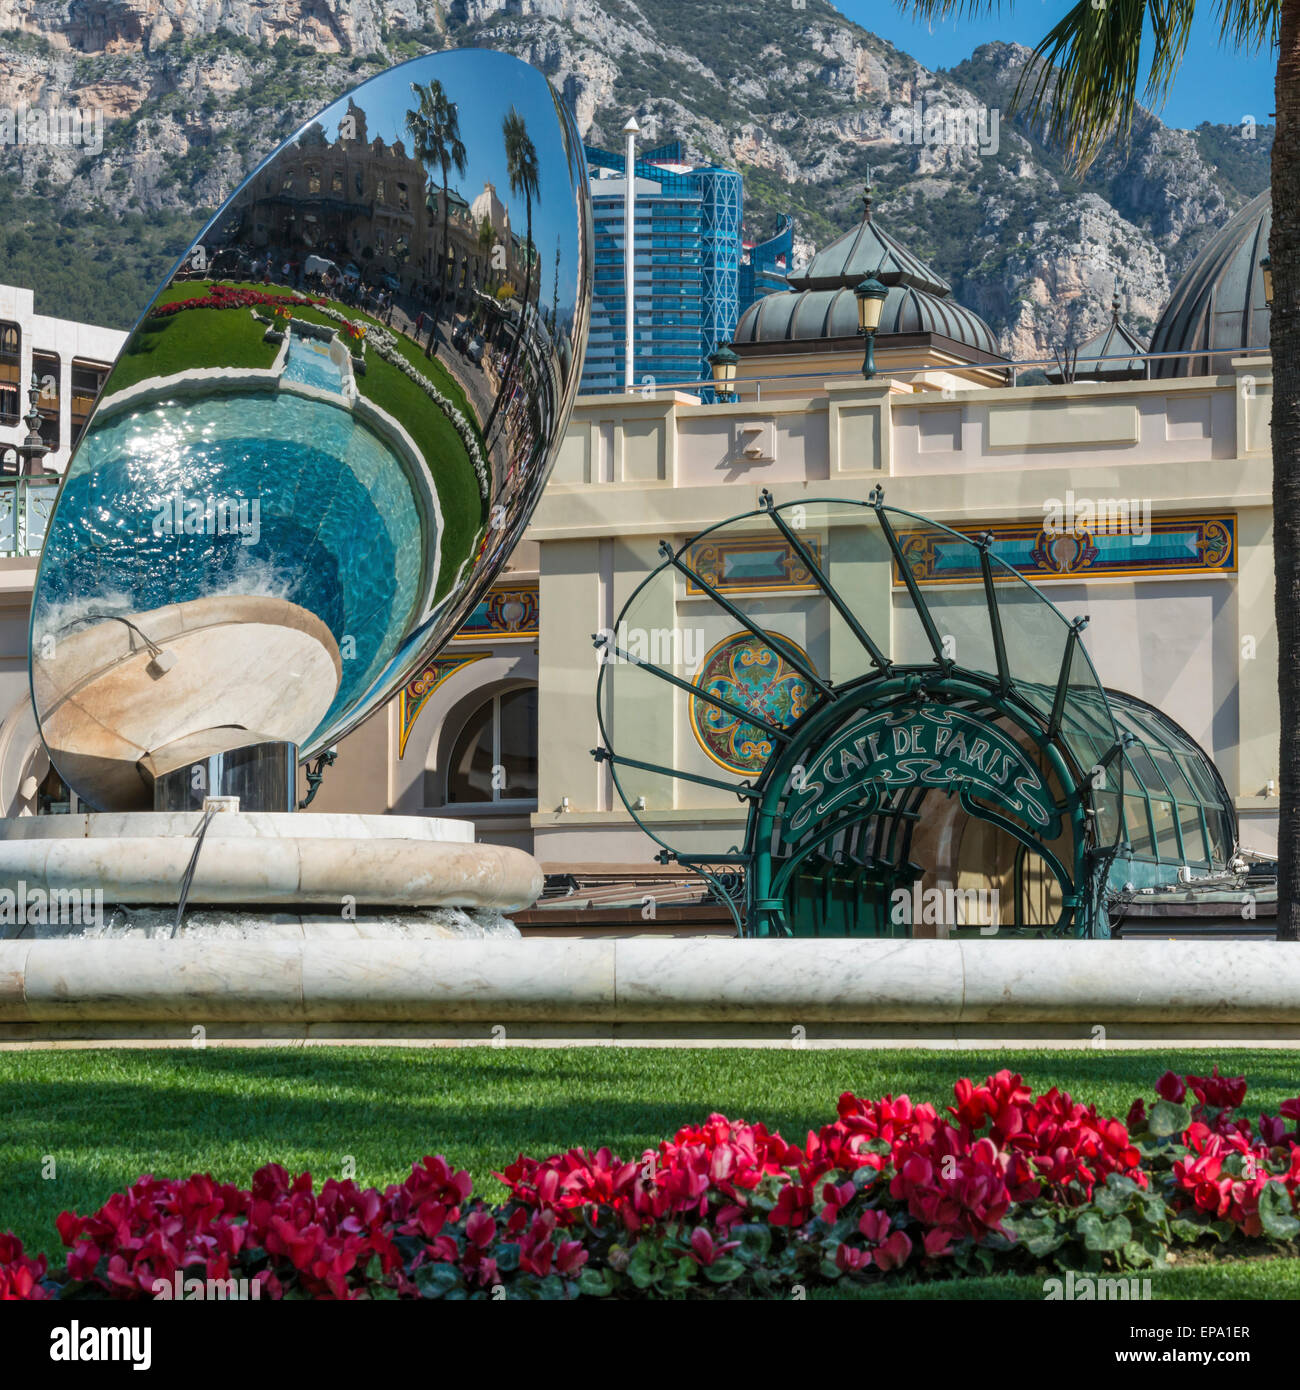 A reflection of the casino in a metal sculpture and the Cafe de Paris entrance in the background in Monte Carlo, Monaco Stock Photo